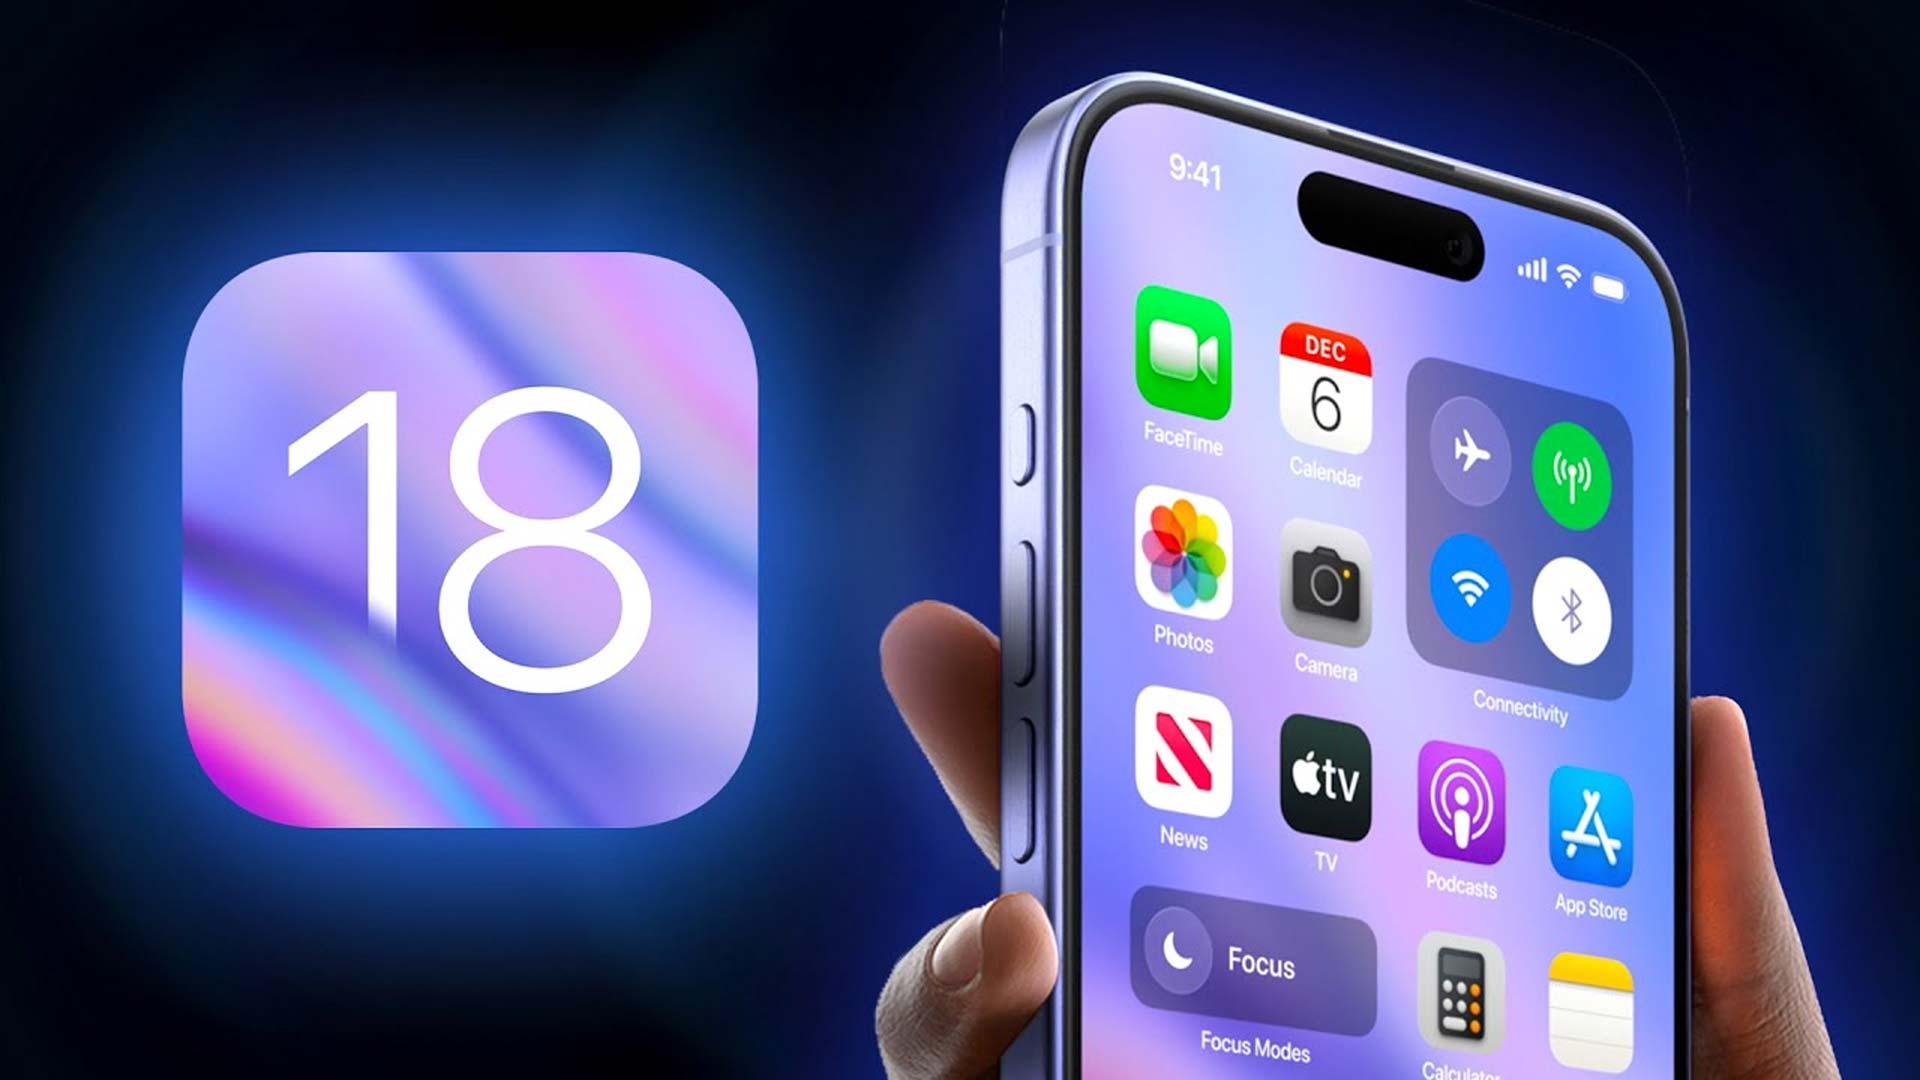 iOS 18 introduces the ability to open any app without unlocking your iPhone